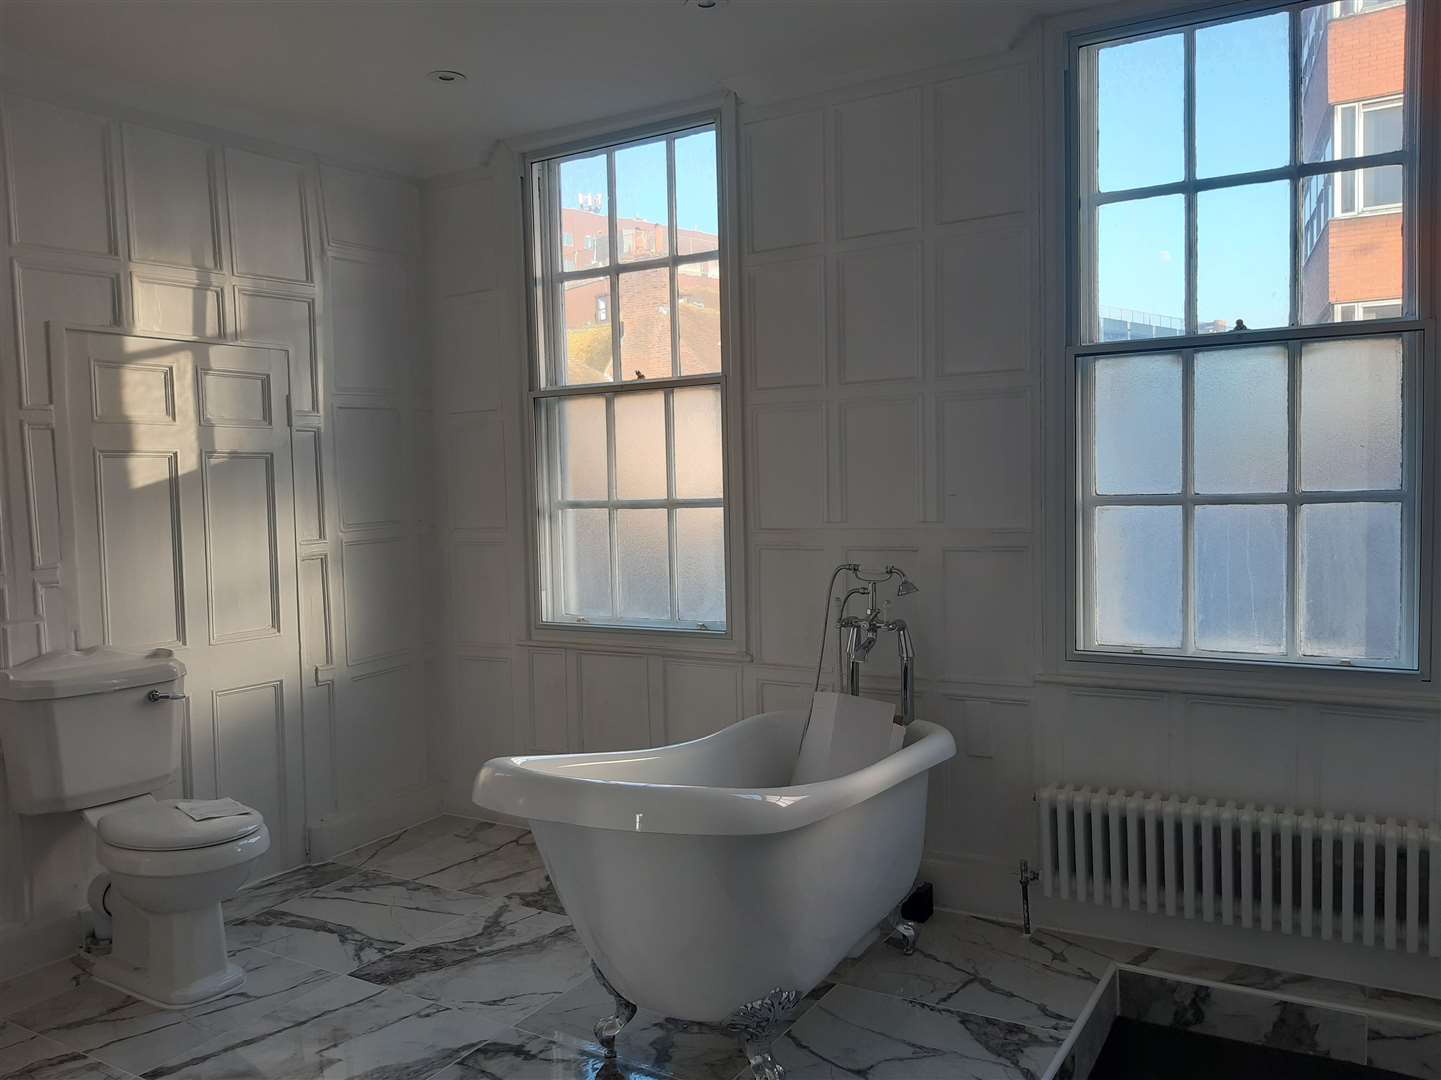 A bathroom in the newly renovated Stone Court House